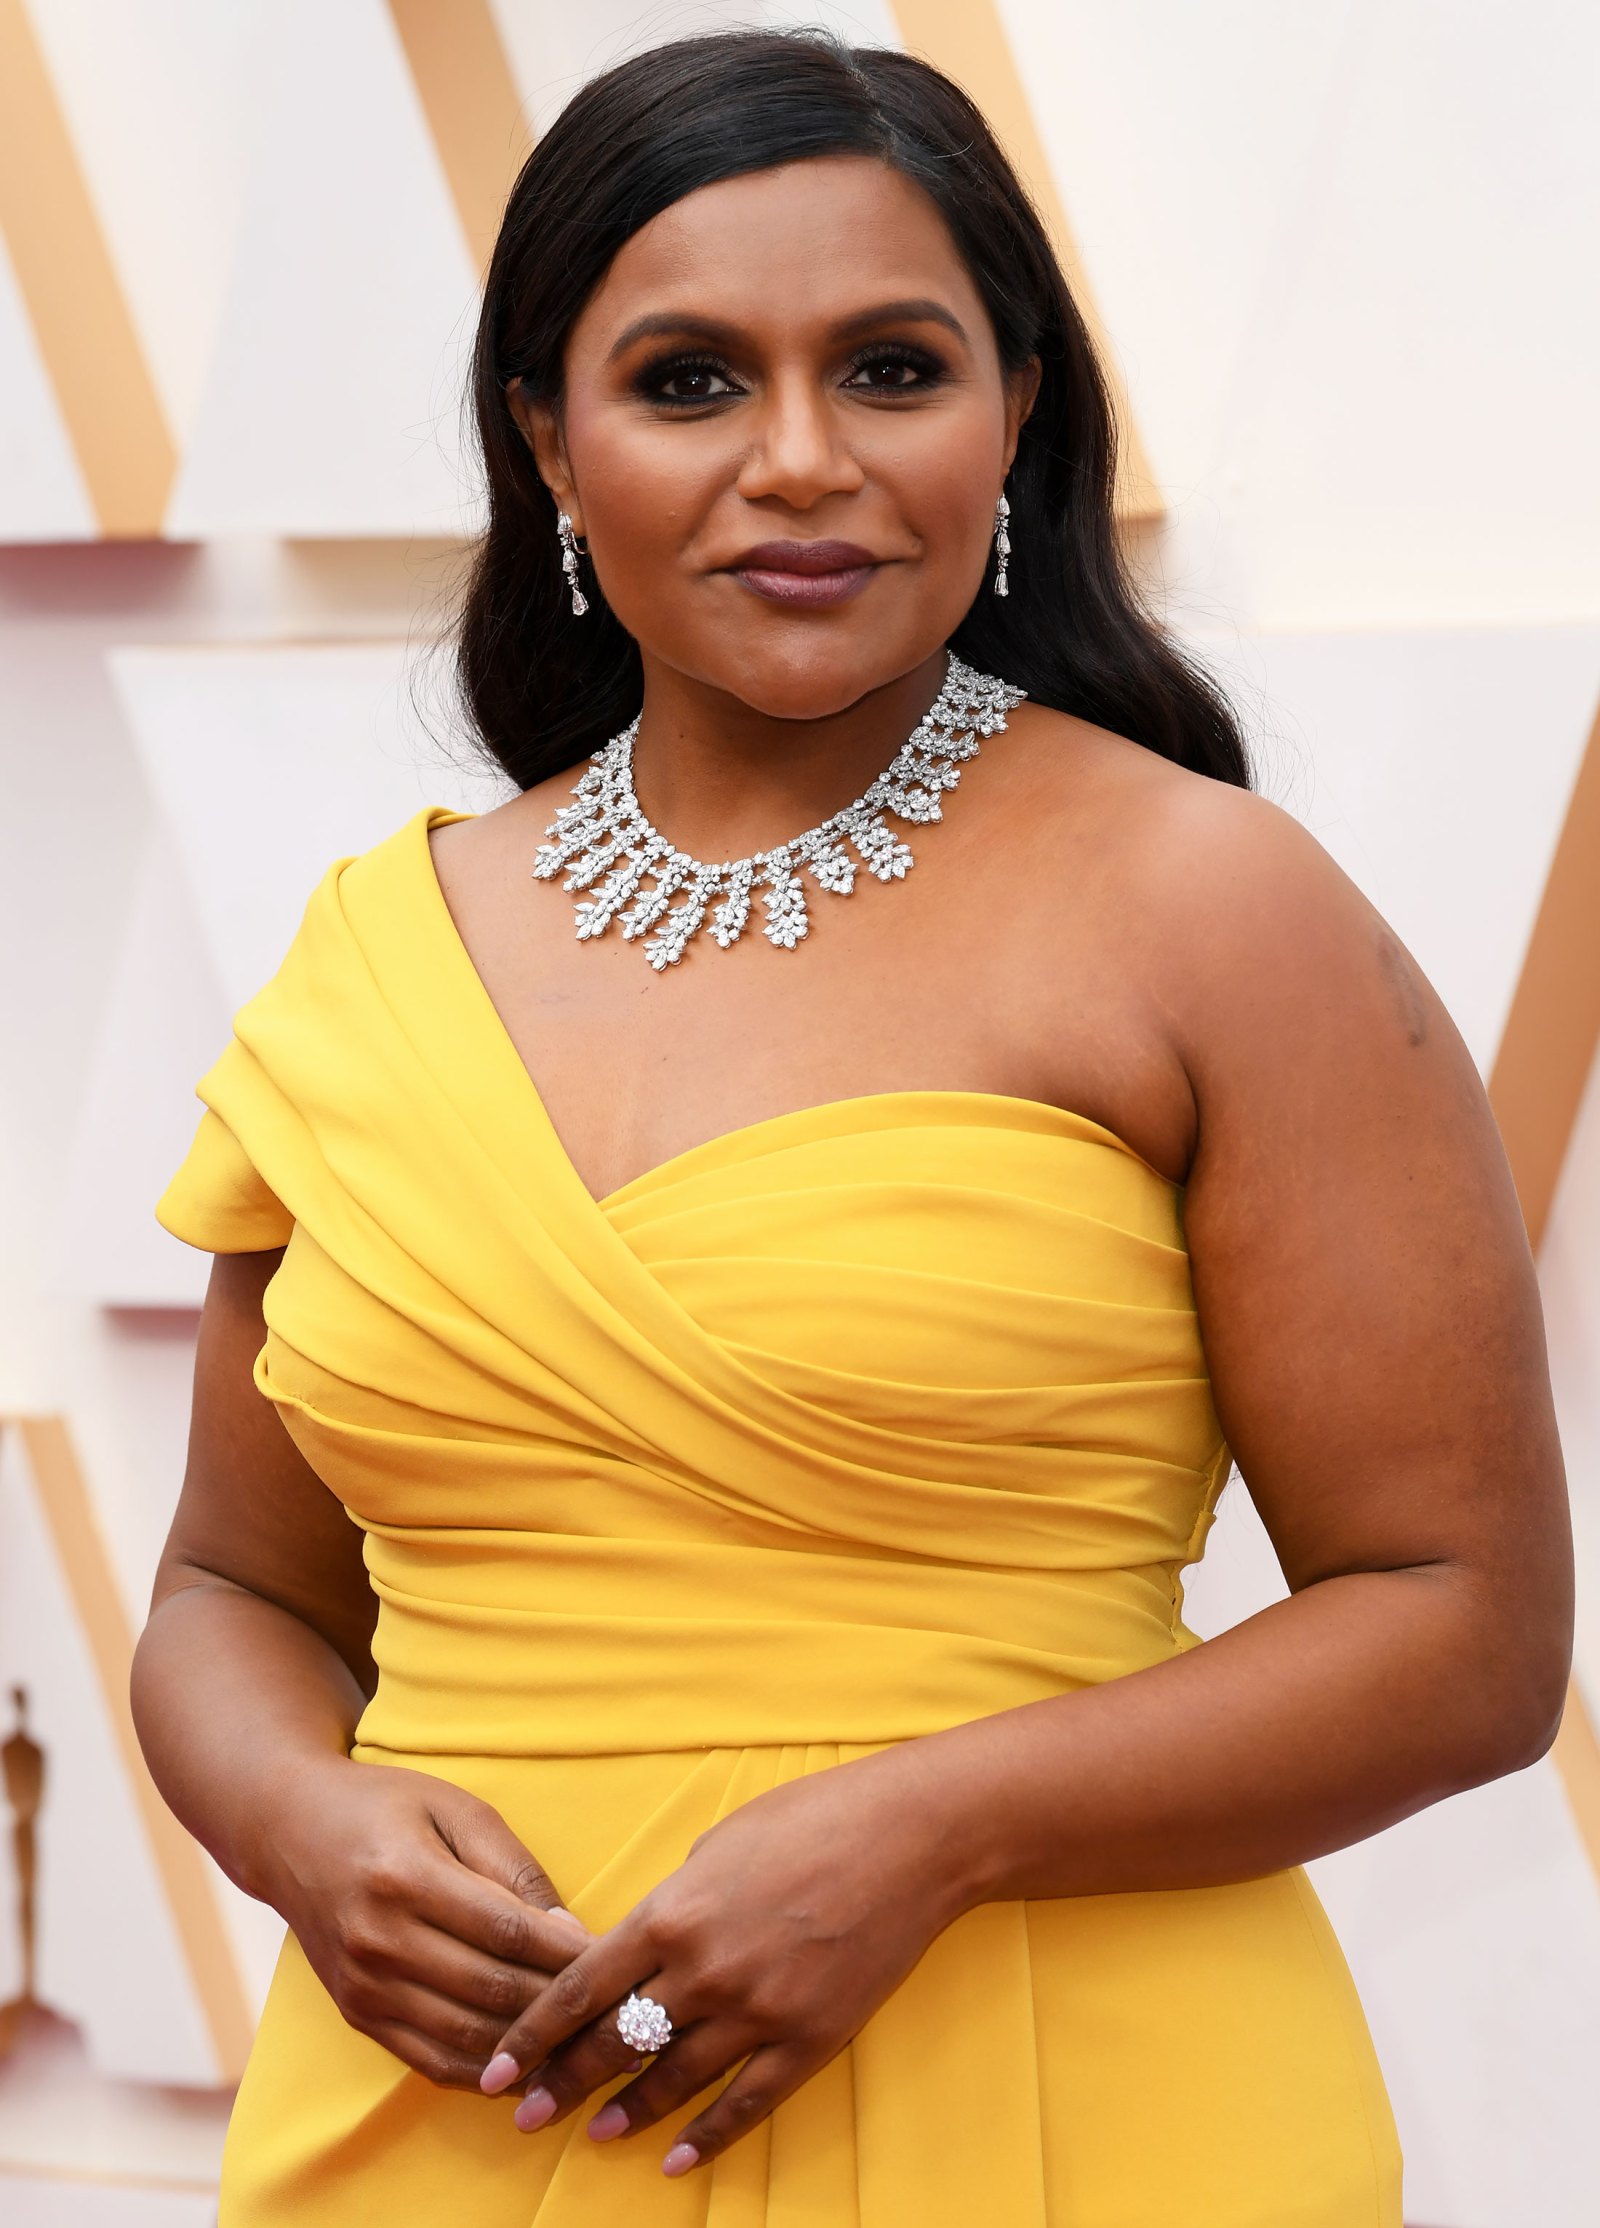 Mindy Kaling Welcomes New Son Spencer